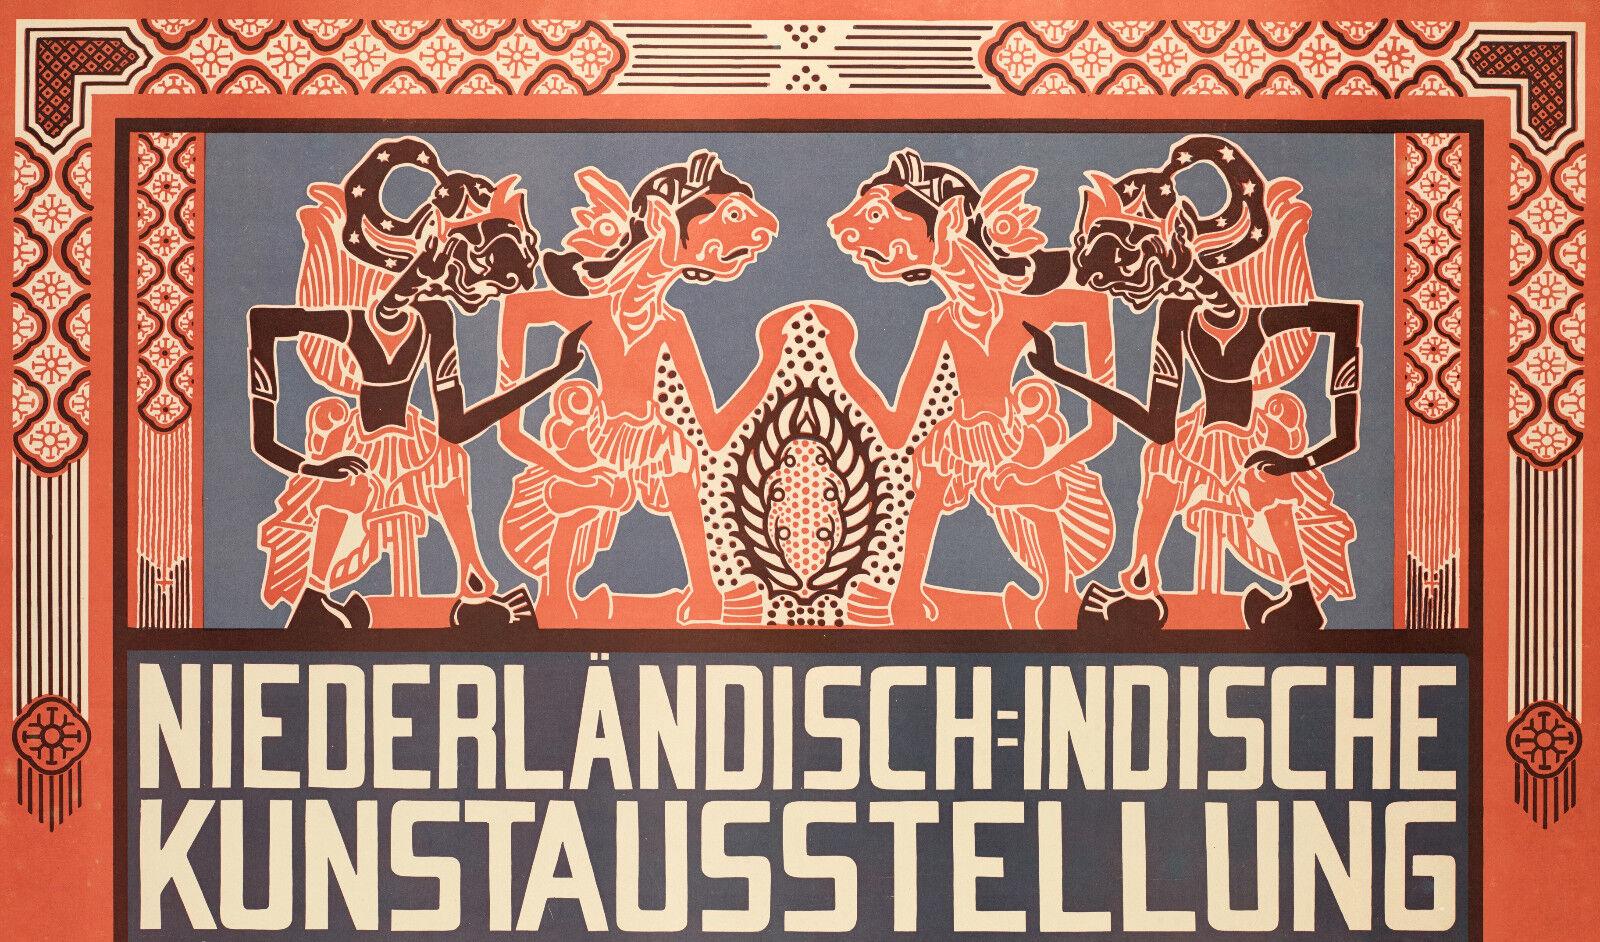 Original Poster-Thorn Prikker-Niederl-Ndisch-Indische Kunstaus-Krefeld, 1906

Indonesian shadow puppets (wayang kulit) with stylized batik borders are represented. This poster is inspired by Batik textiles, then imported from Java during the